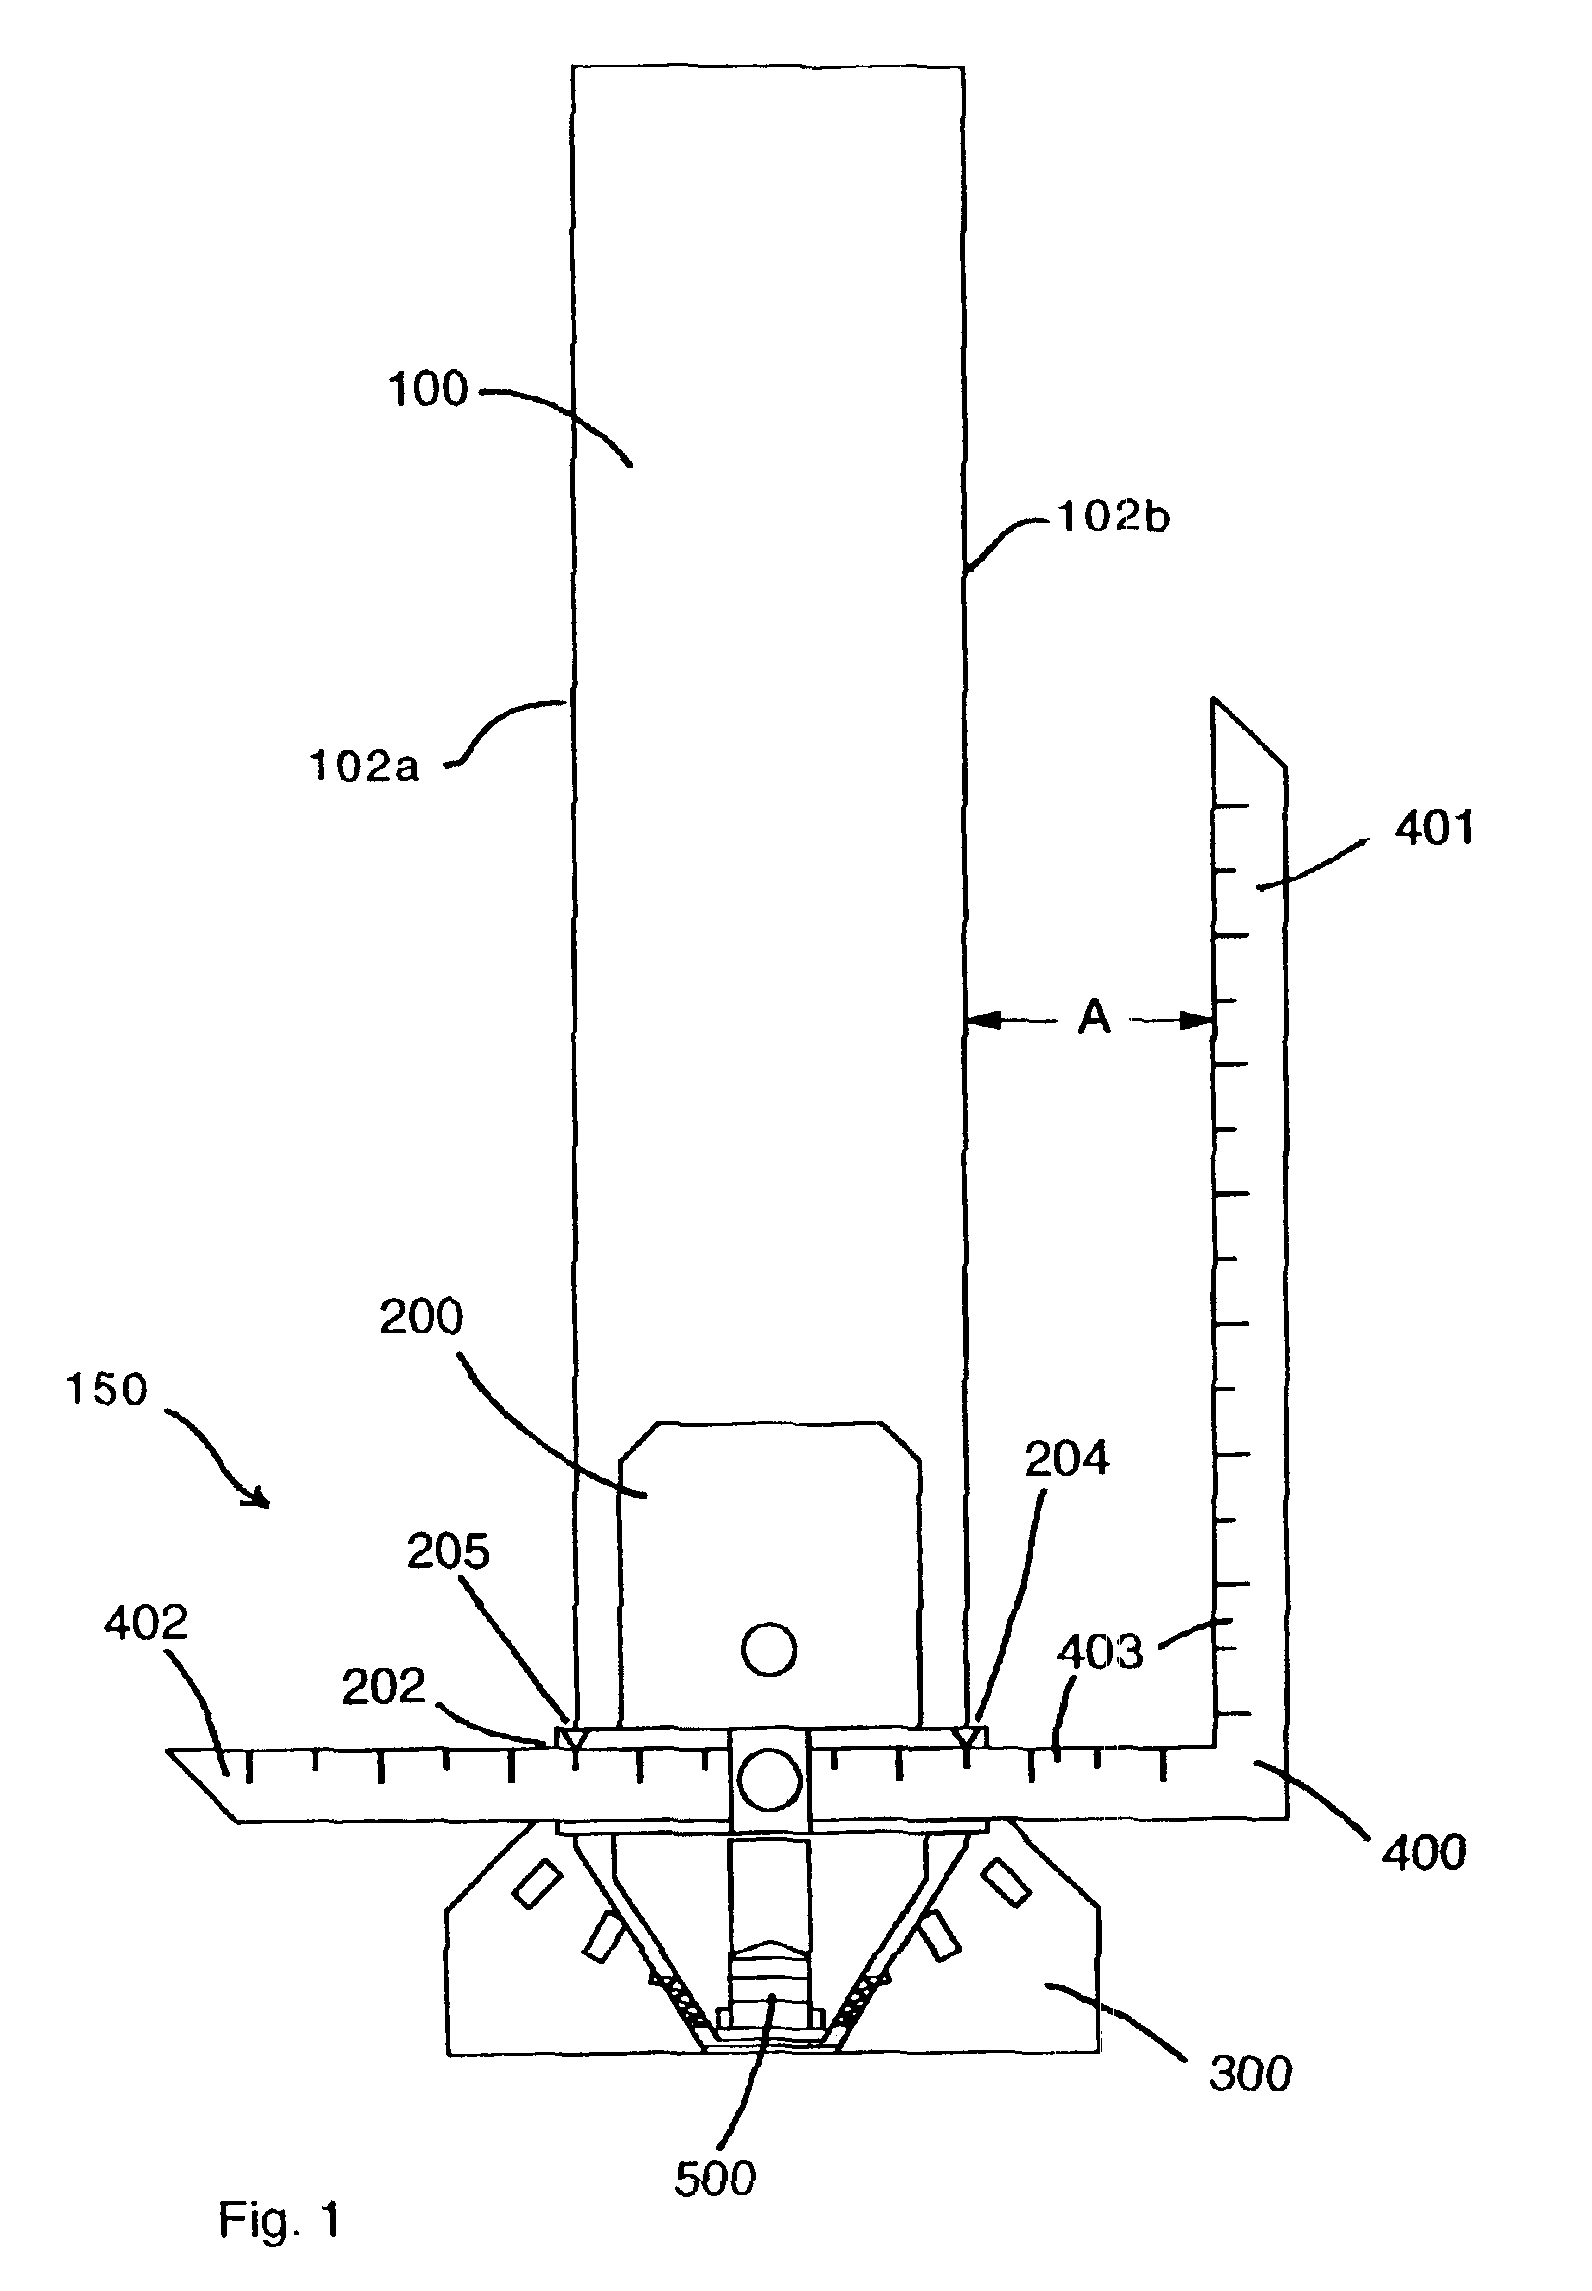 Apparatus and methods for measuring the movement of a straightedge to draw lines or cut strips of a flat material